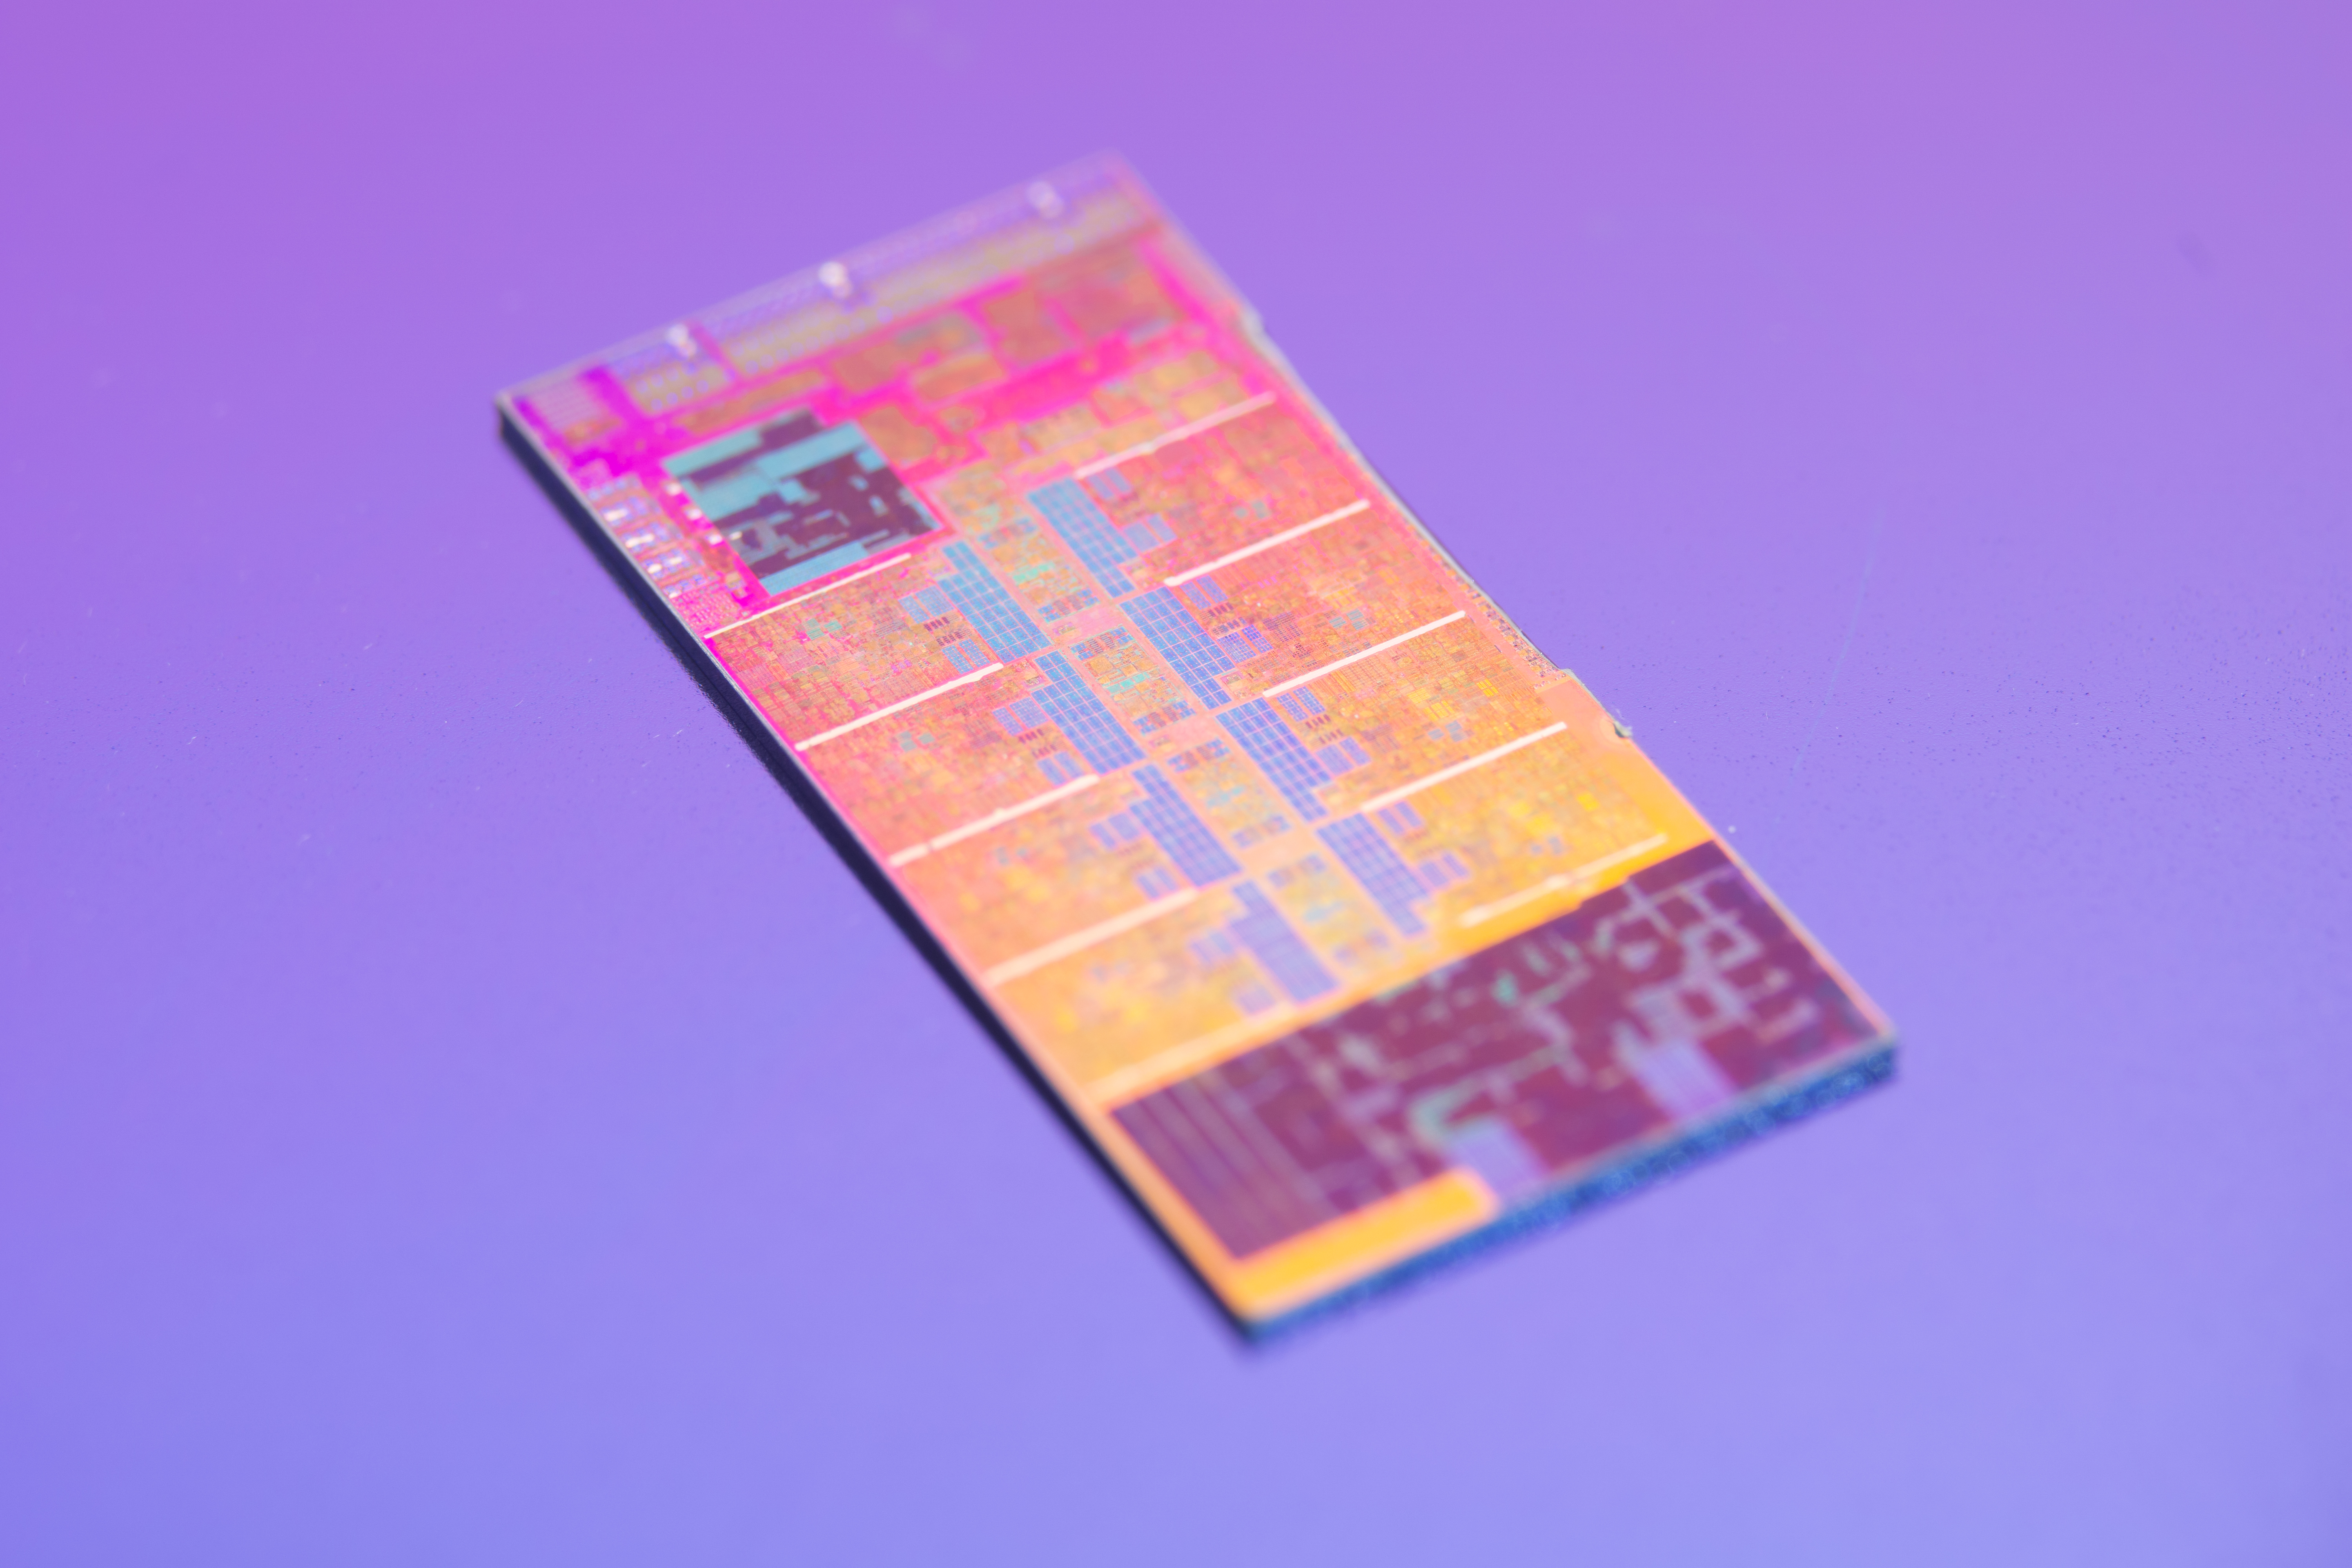 Microchip CPU Processor Integrated Circuits Technology Colorful Intel 6000x4000